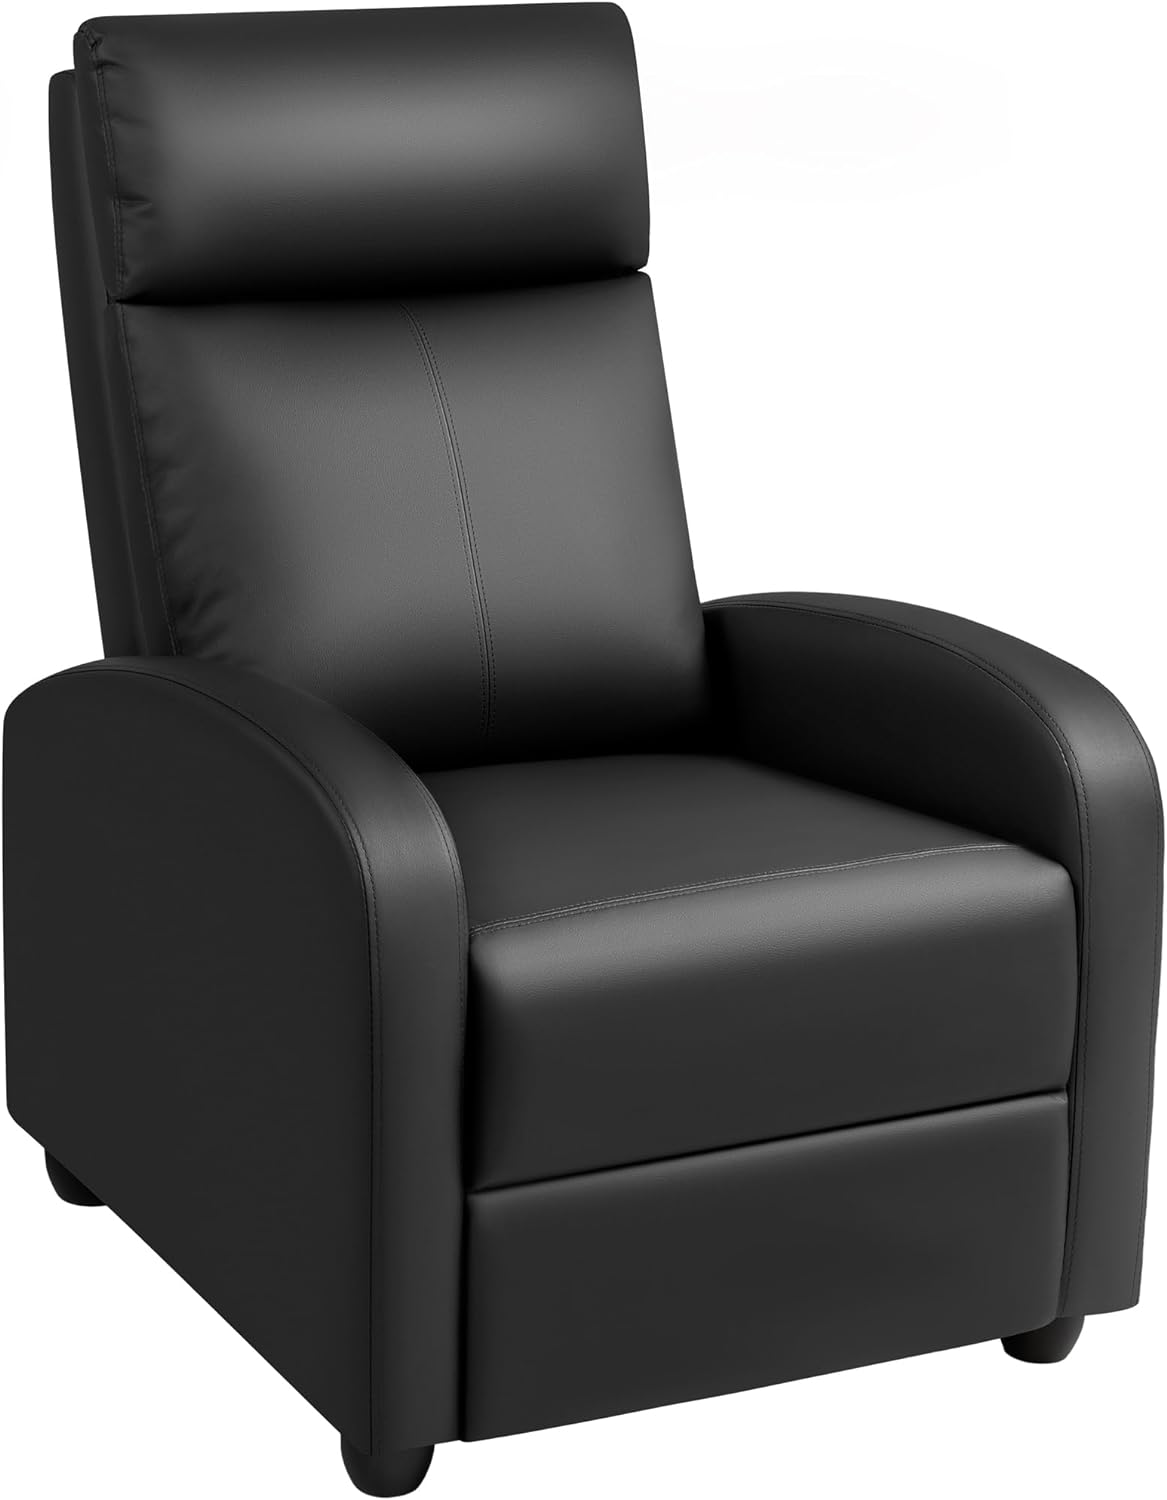 Recliner Chair Modern PU Leather Reclining Chair Ergonomic Adjustable Recliner for Living Room Home Theater Seating Single Sofa (Black)